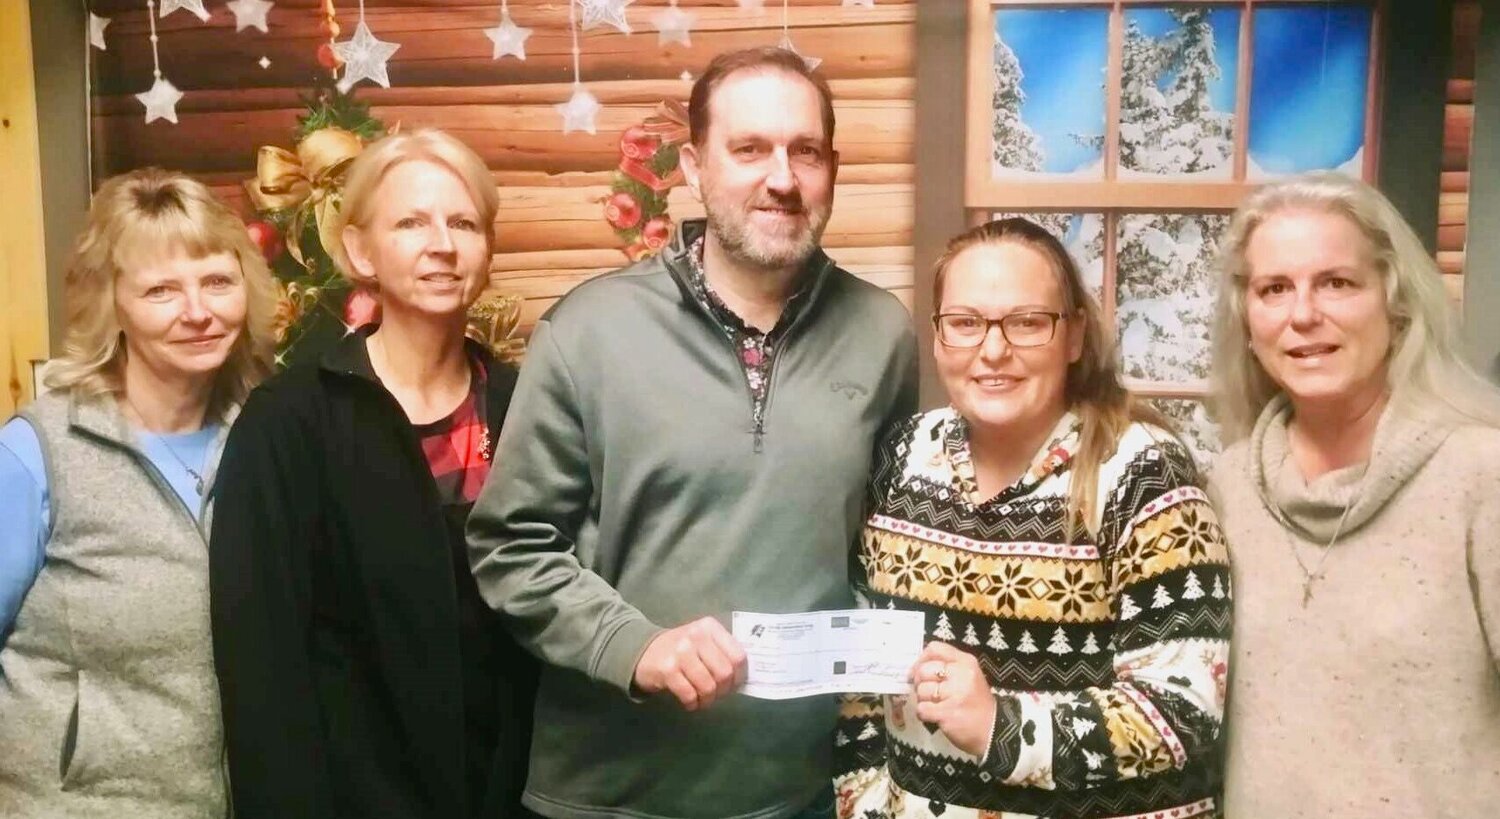 On Nov. 30, Ozark Independent Living donated $500 to Christos House to help provide Christmas gifts to families staying at the organization's emergency domestic and sexual violence shelter. "We are grateful for the generous contribution from Ozark Independent Living," said Interim Christos House Shelter Supervisor Amanda Wade. "This will go a long way to help the families staying with us have a good Christmas." From left: Ozark Independent Living employees Lori Cox, Shelley Surface and Executive Director John Adamson; Wade; and Christos House Interim Executive Director Kelli Neel.